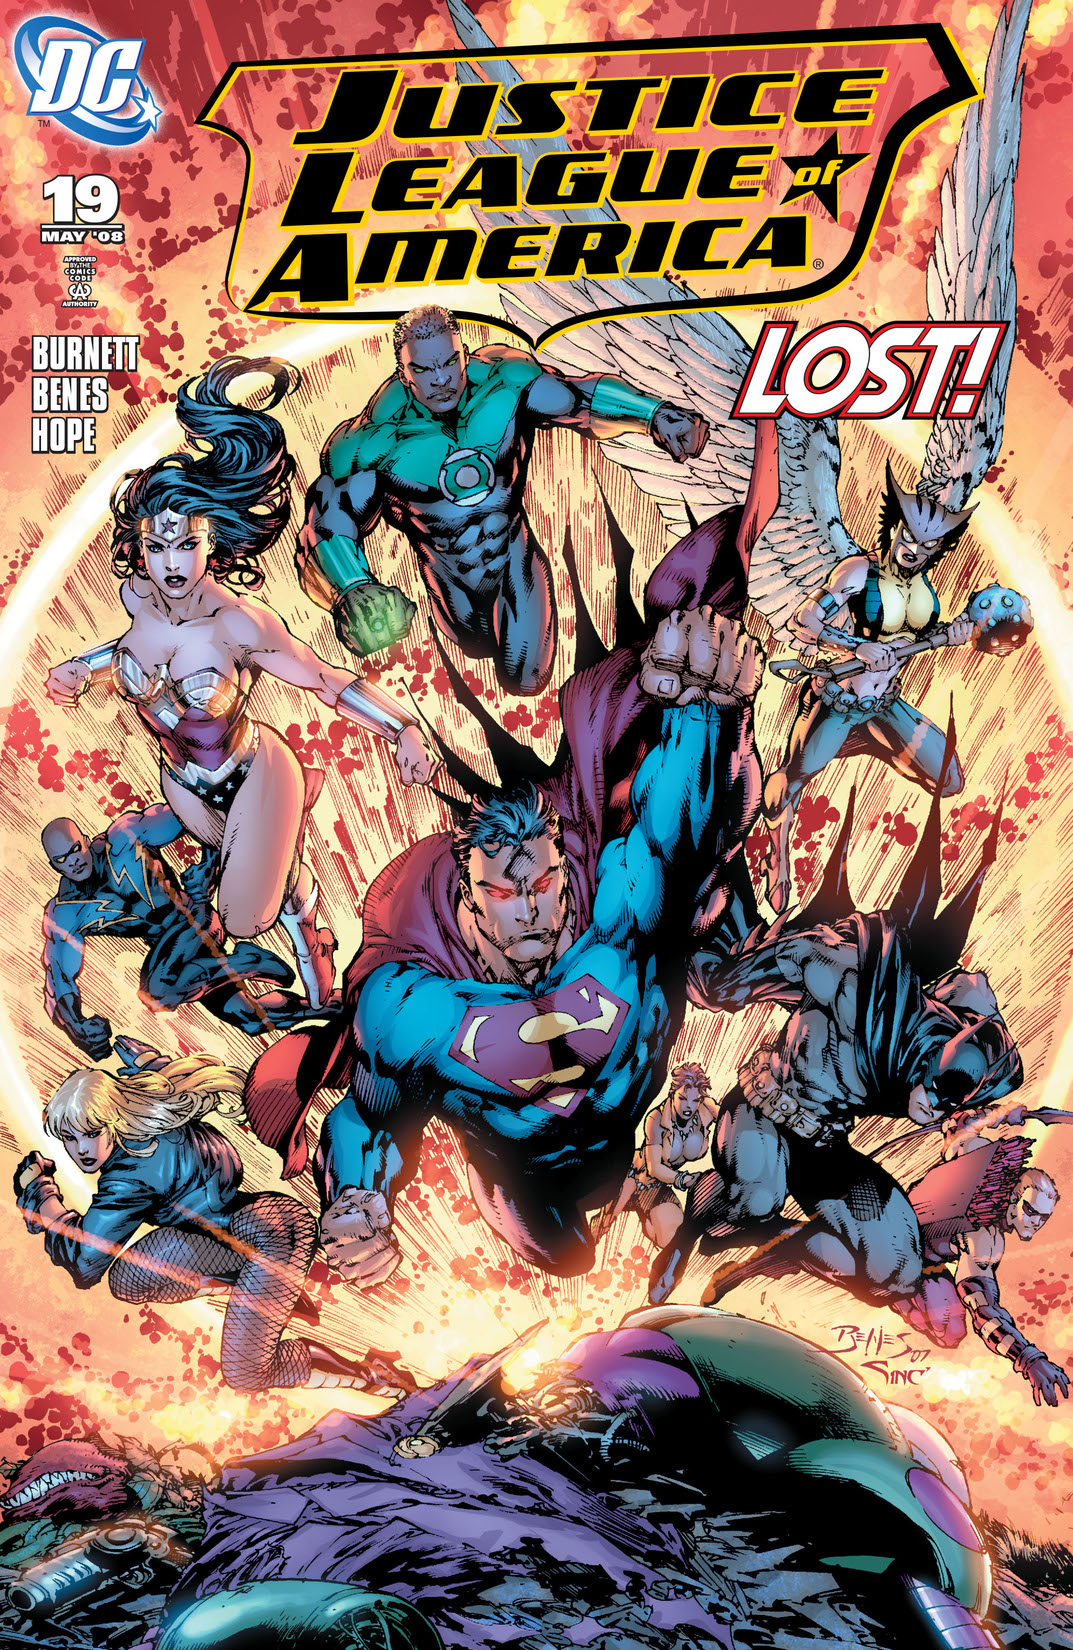 Justice League of America (2006-) #19 preview images